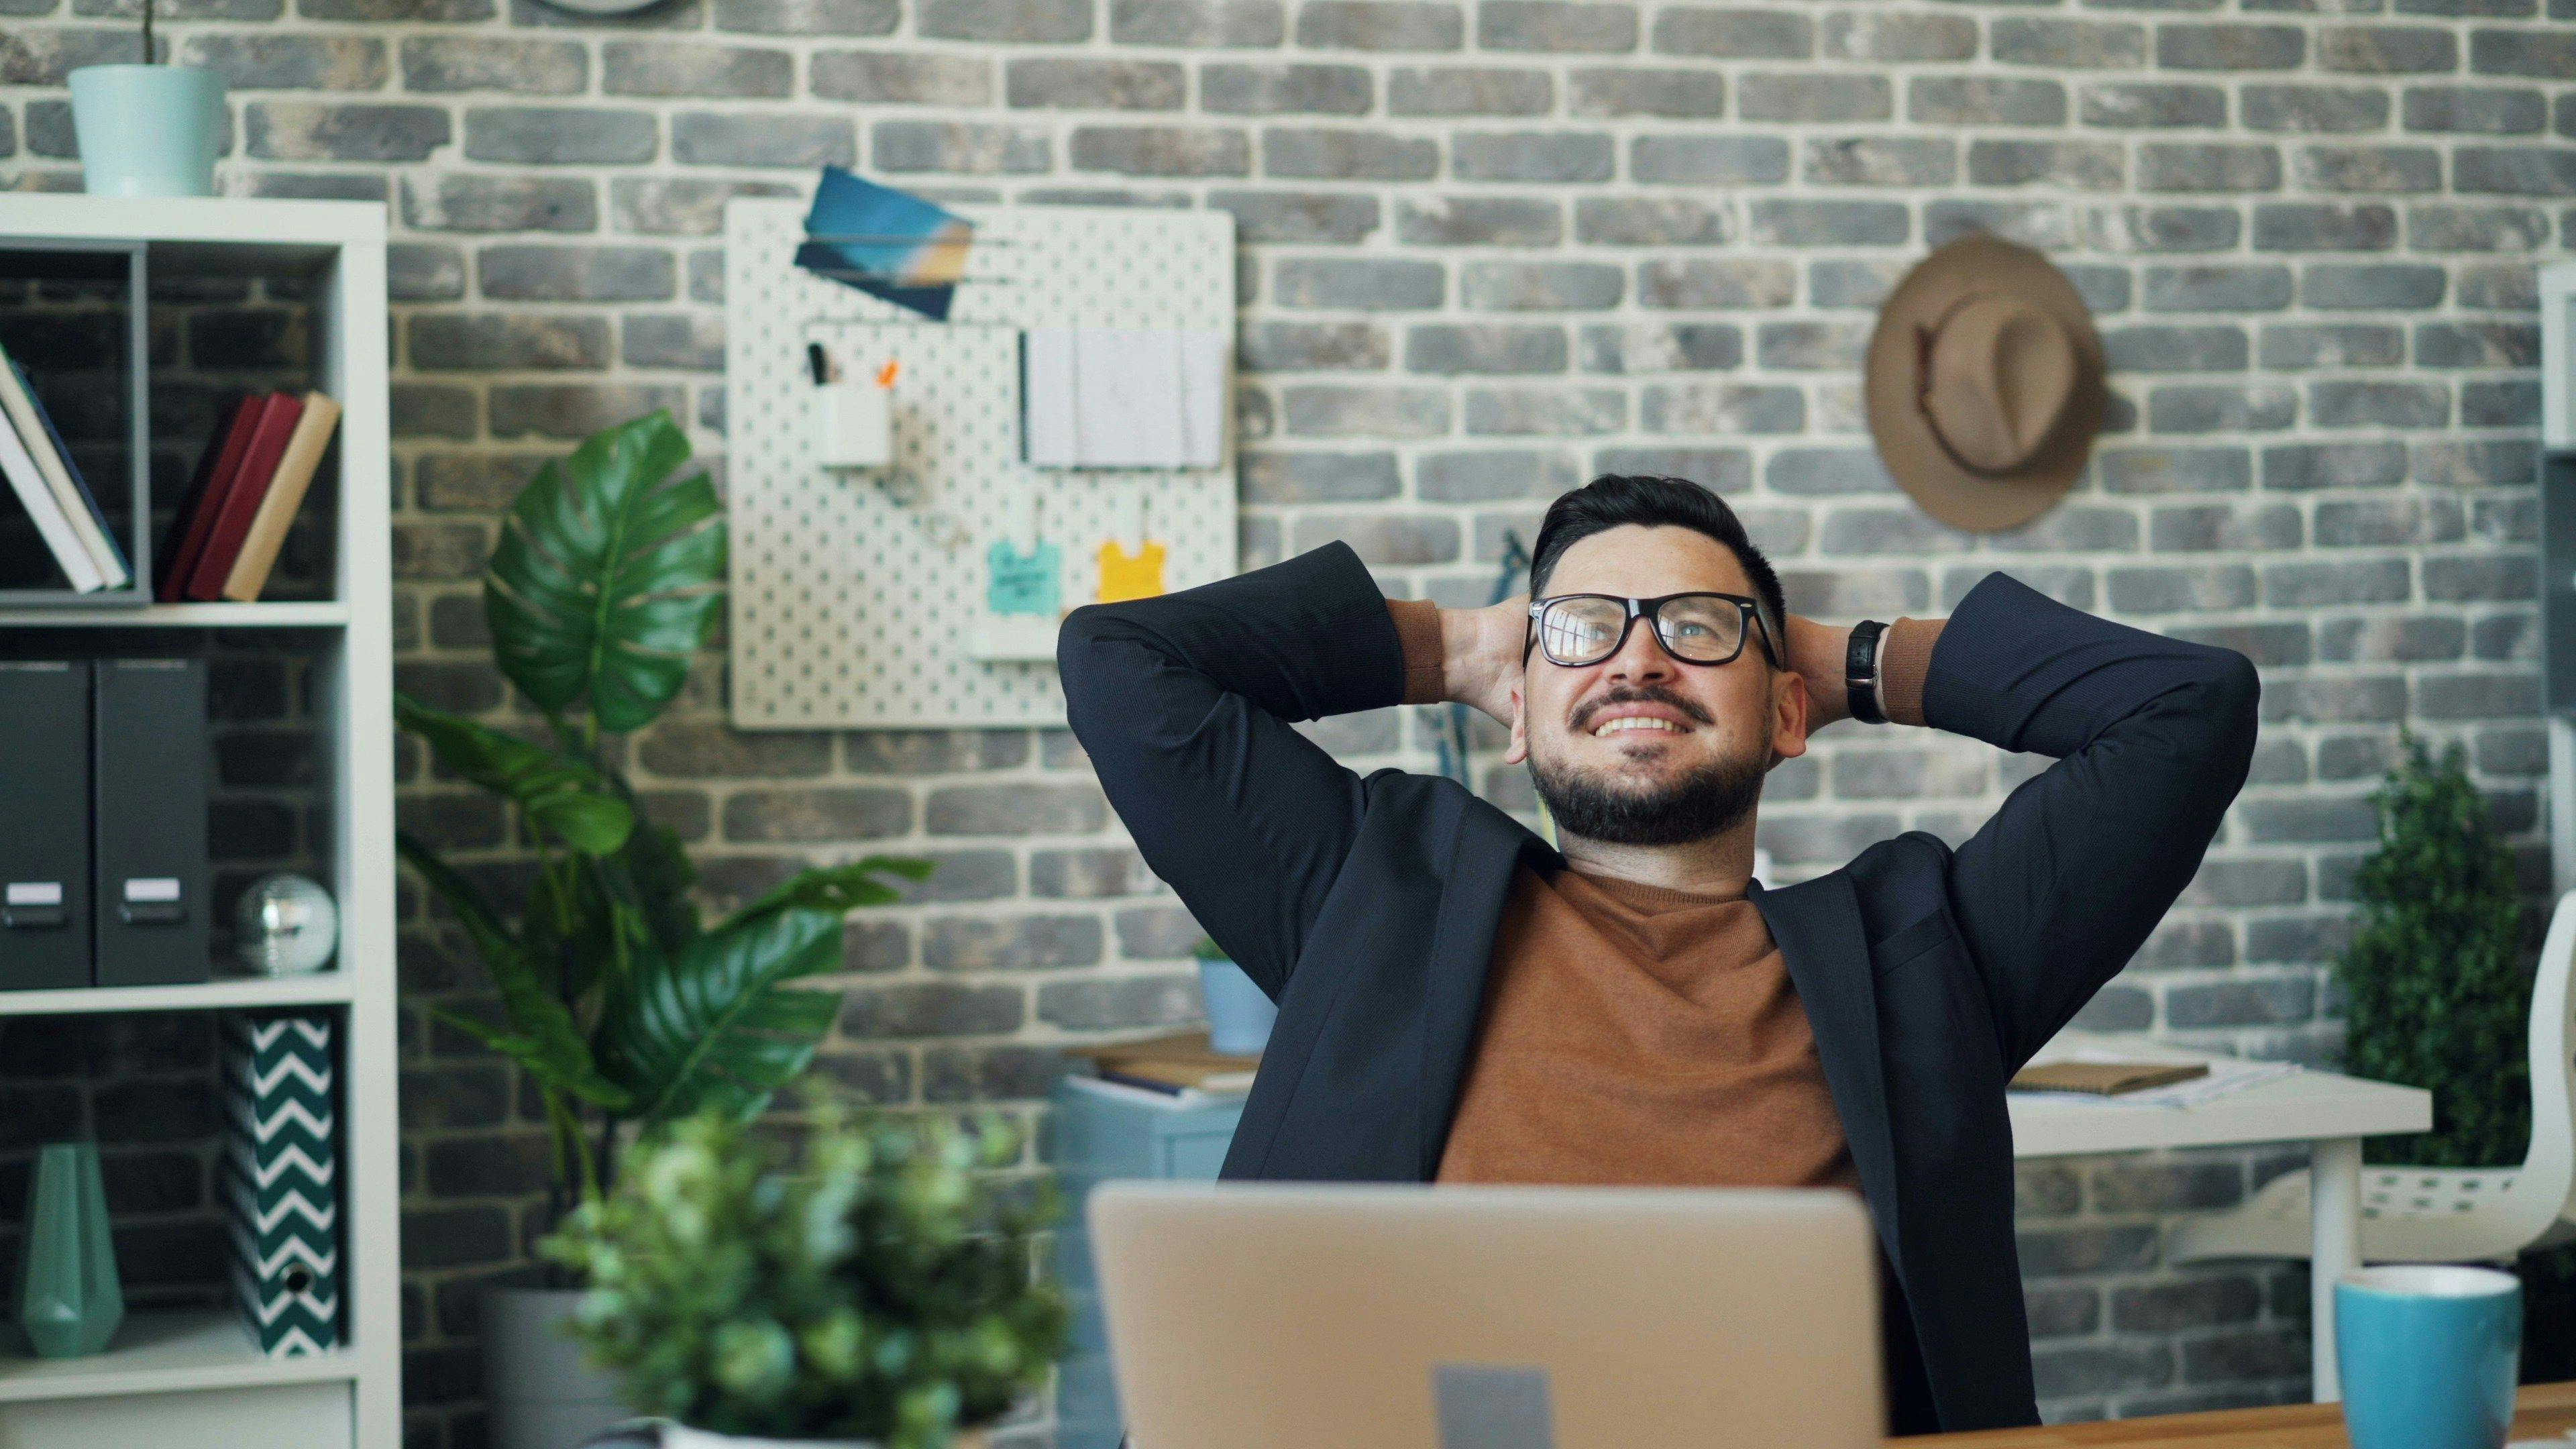 A man in a stylish office leans back in his chair with a satisfied smile, looking relaxed and confident. The modern workspace features a brick wall, indoor plants, and a laptop on the desk, suggesting productivity and creativity. This image is ideal for illustrating the ease and benefits of AI copywriting tools available for free.